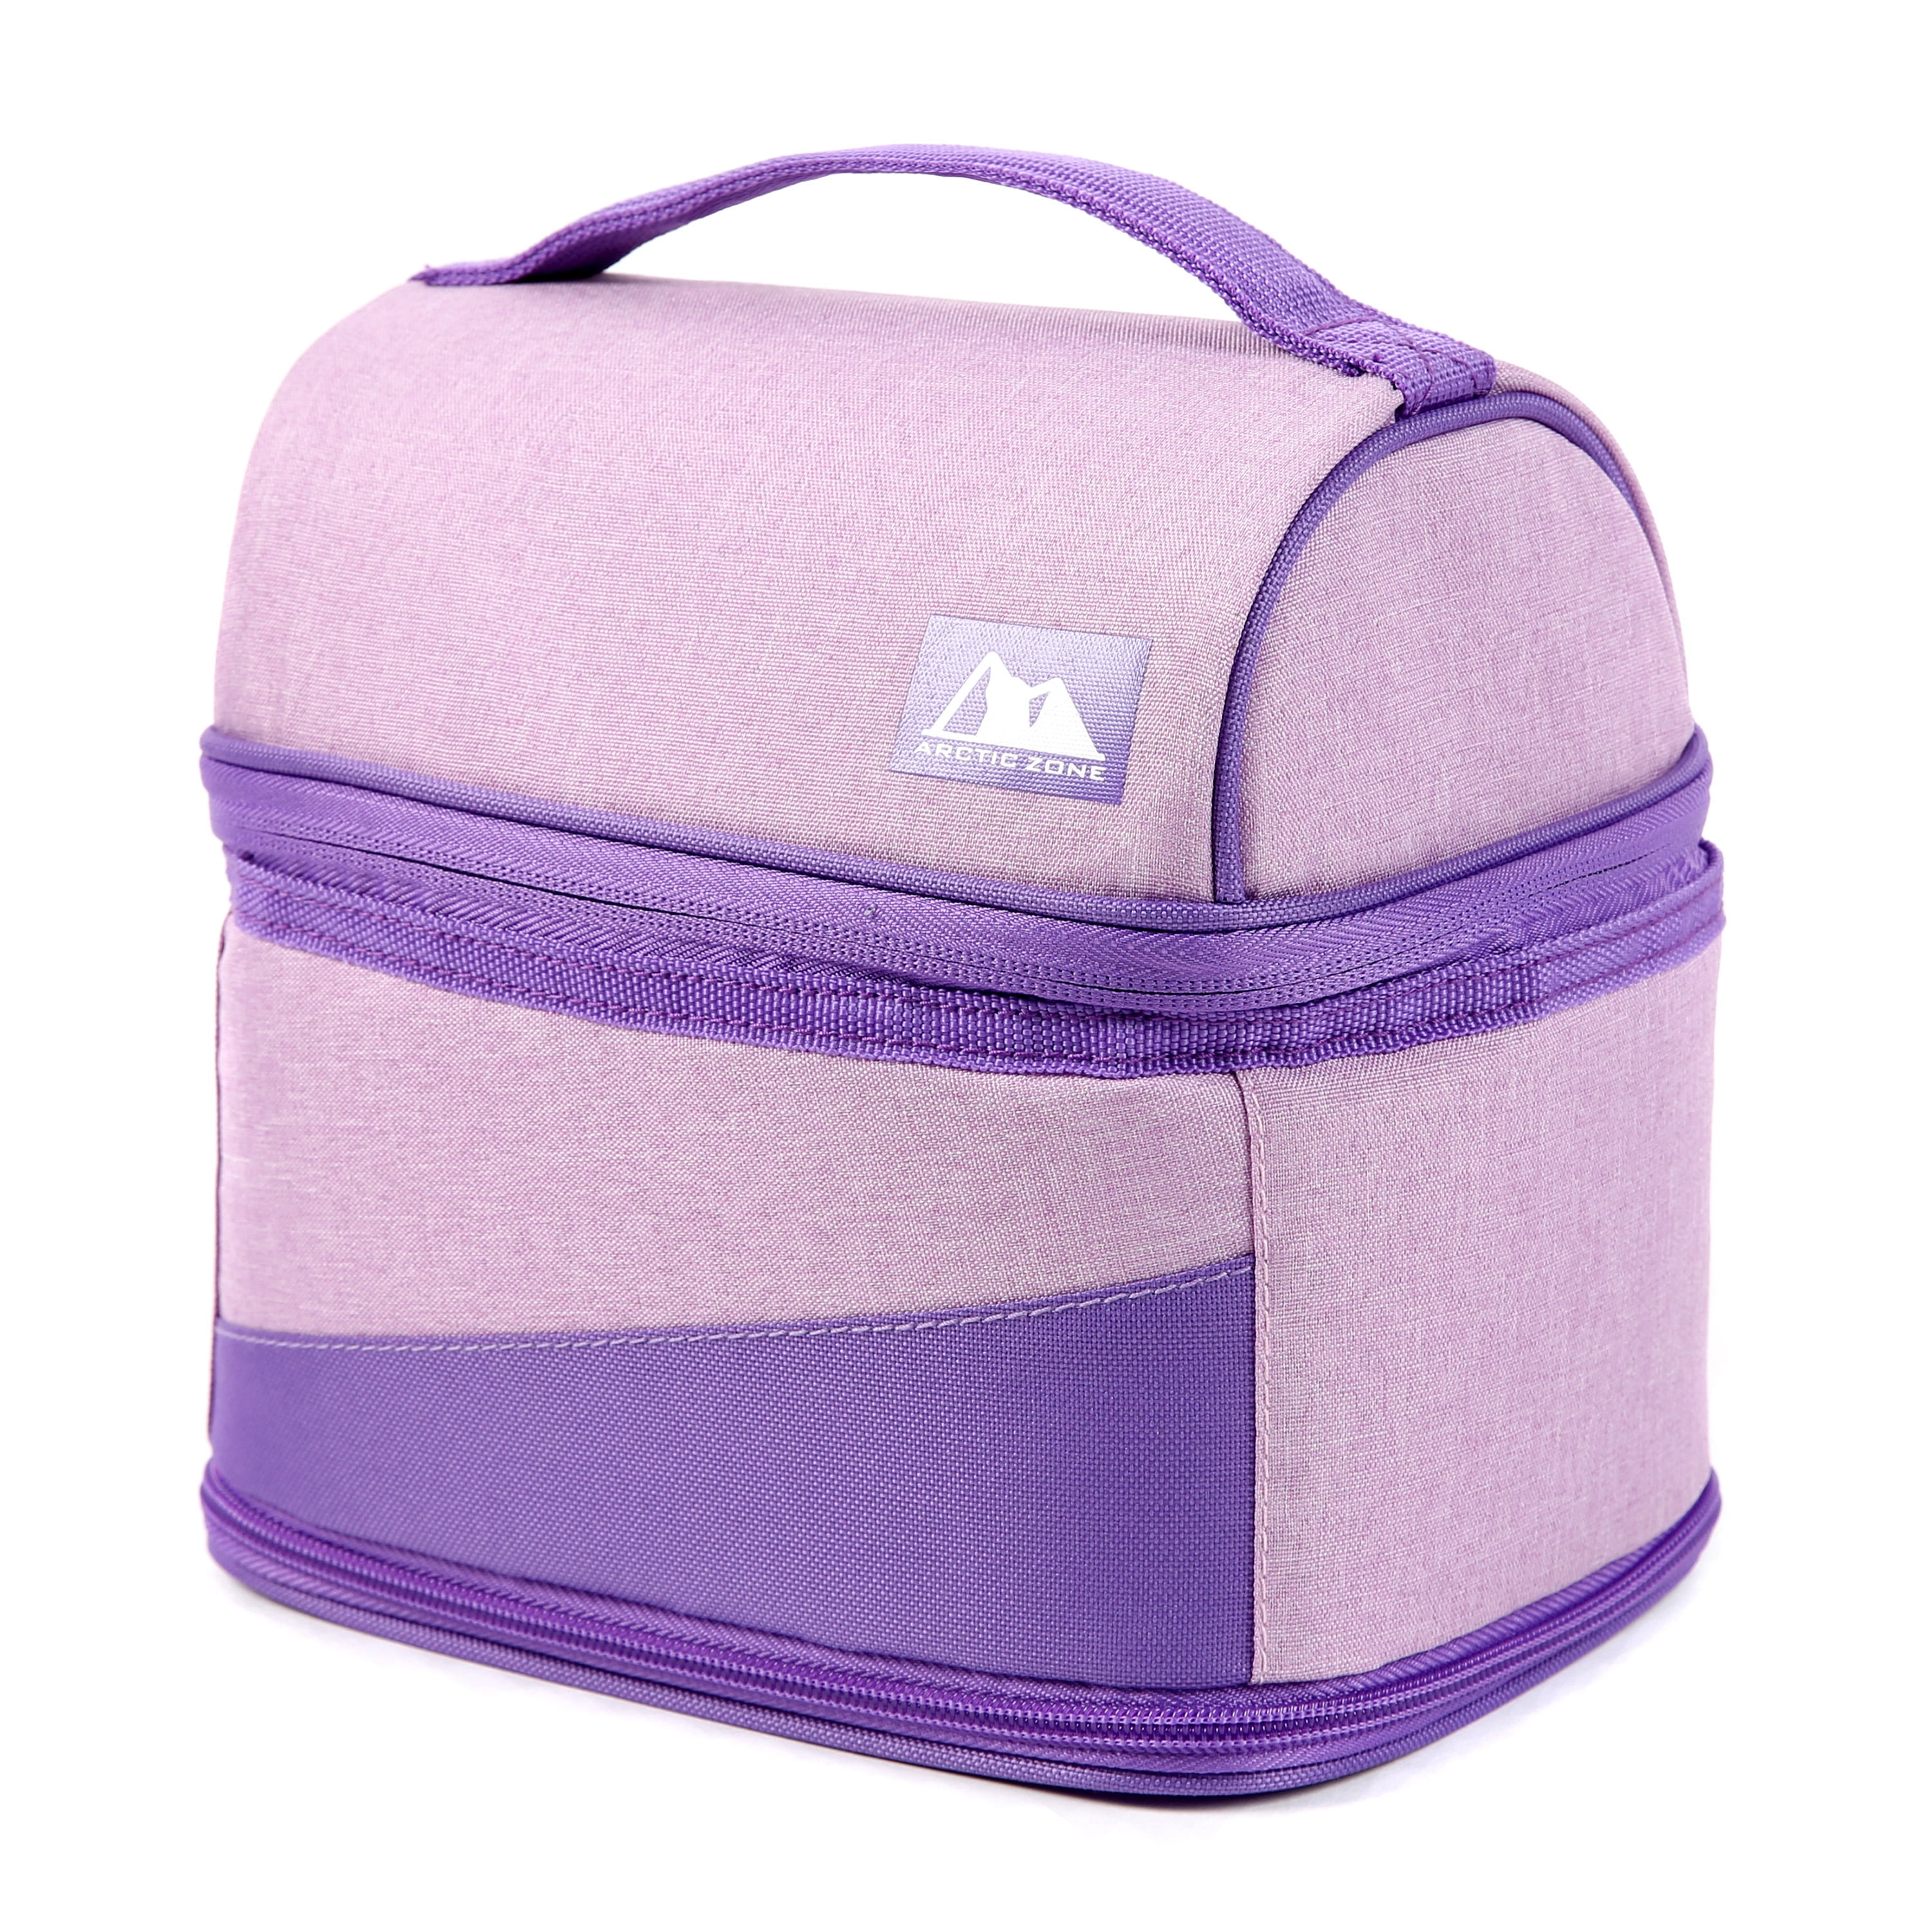 Frozen Kids' Square Lunch Box and Bag - Purple 1 ct